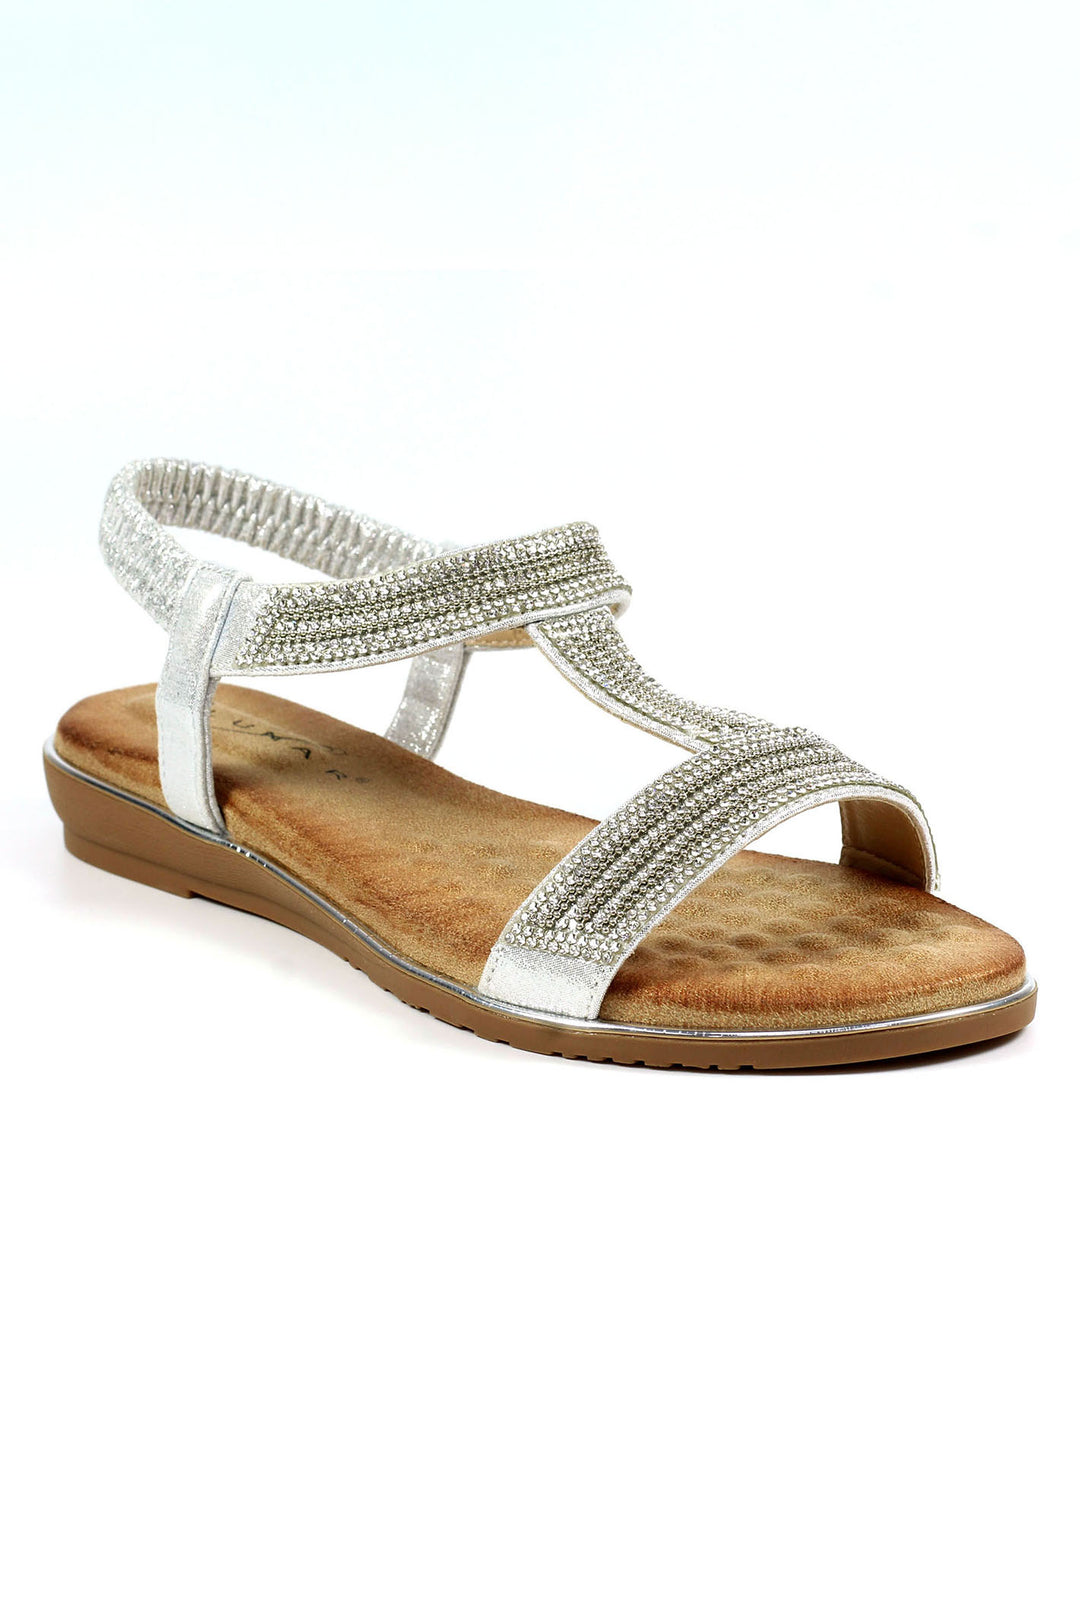 Lunar JLY218 Metallic Silver Sandals - Experience Boutique